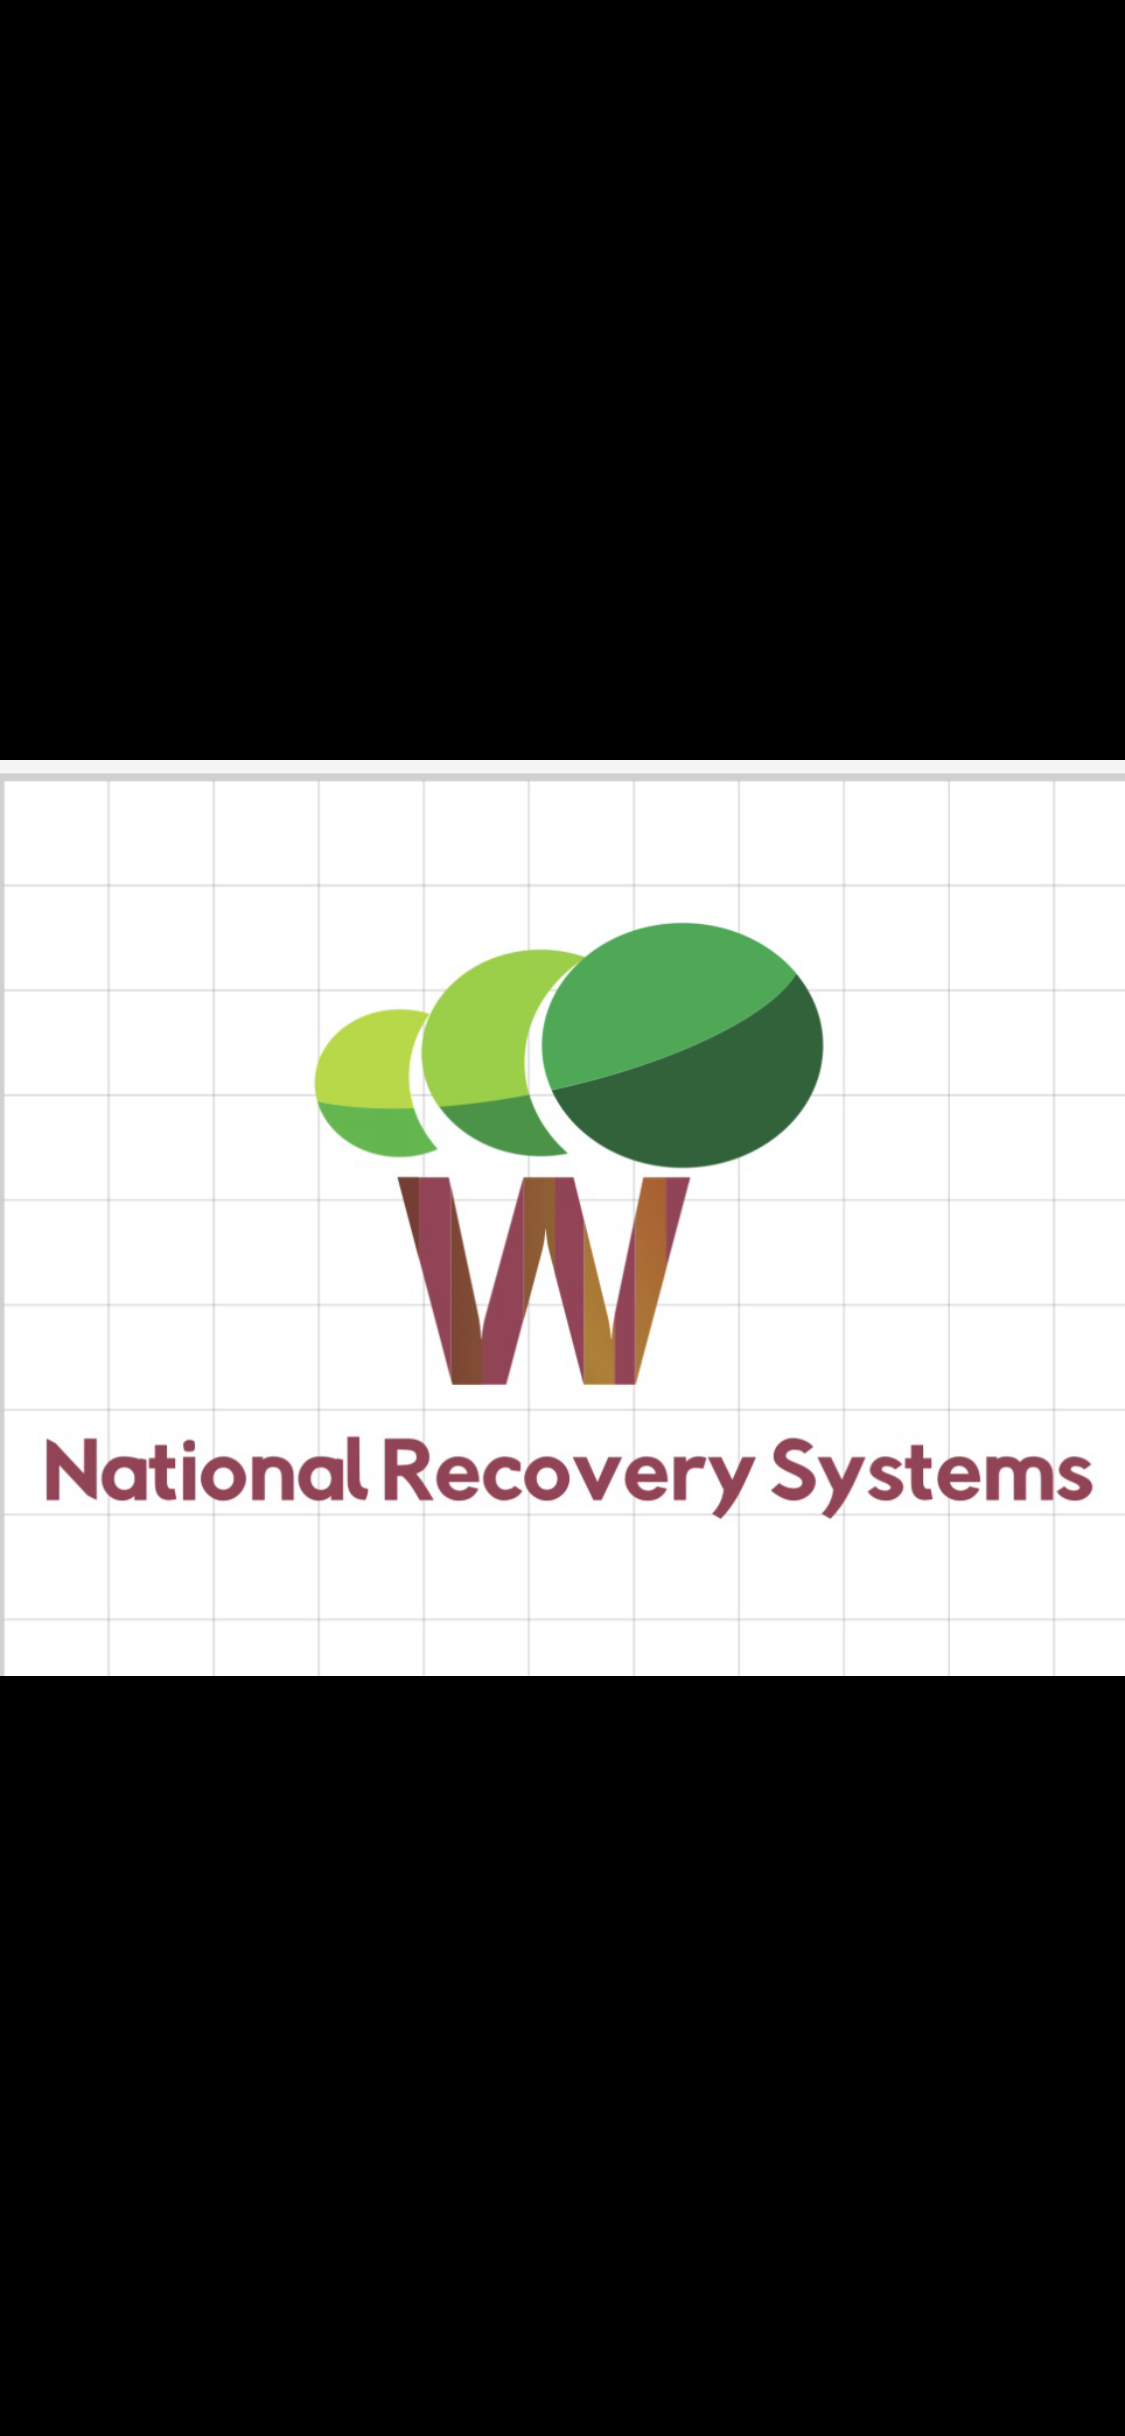 National Recovery Systems